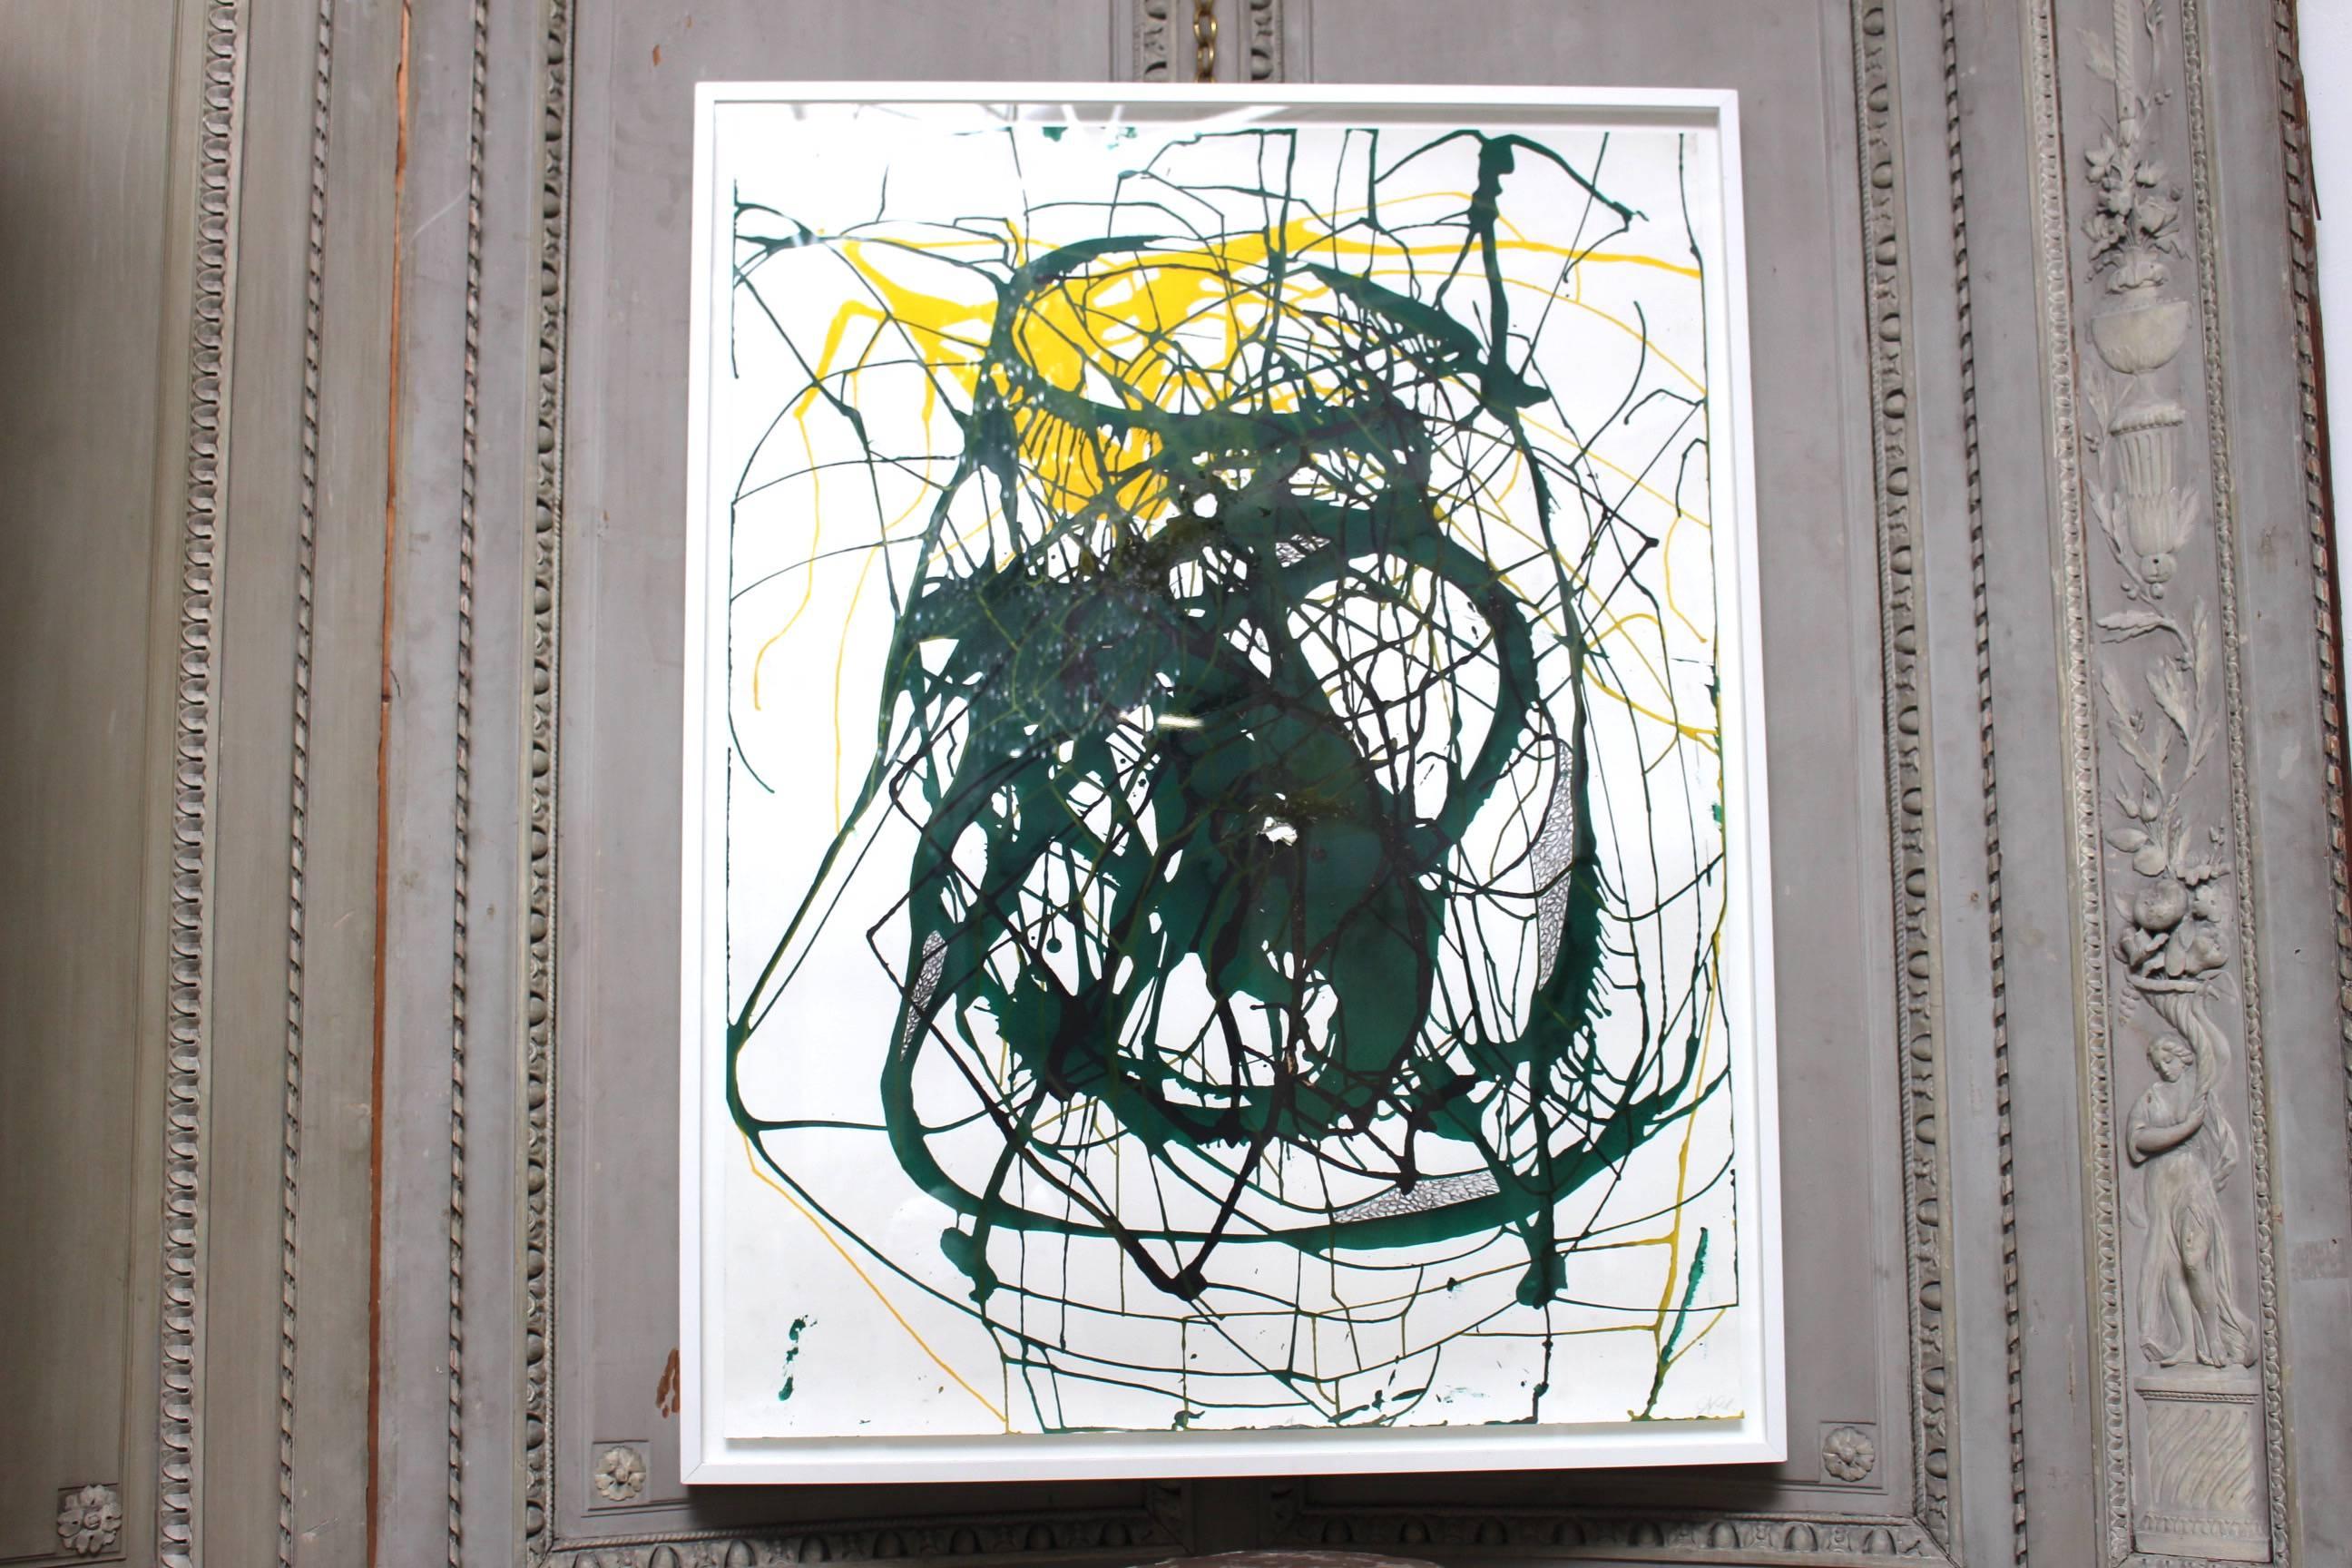 Ink, acrylic, charcoal on paper. “Untitled 1”. Framed.
Artist: Jack Cornell, Taos, New Mexico.